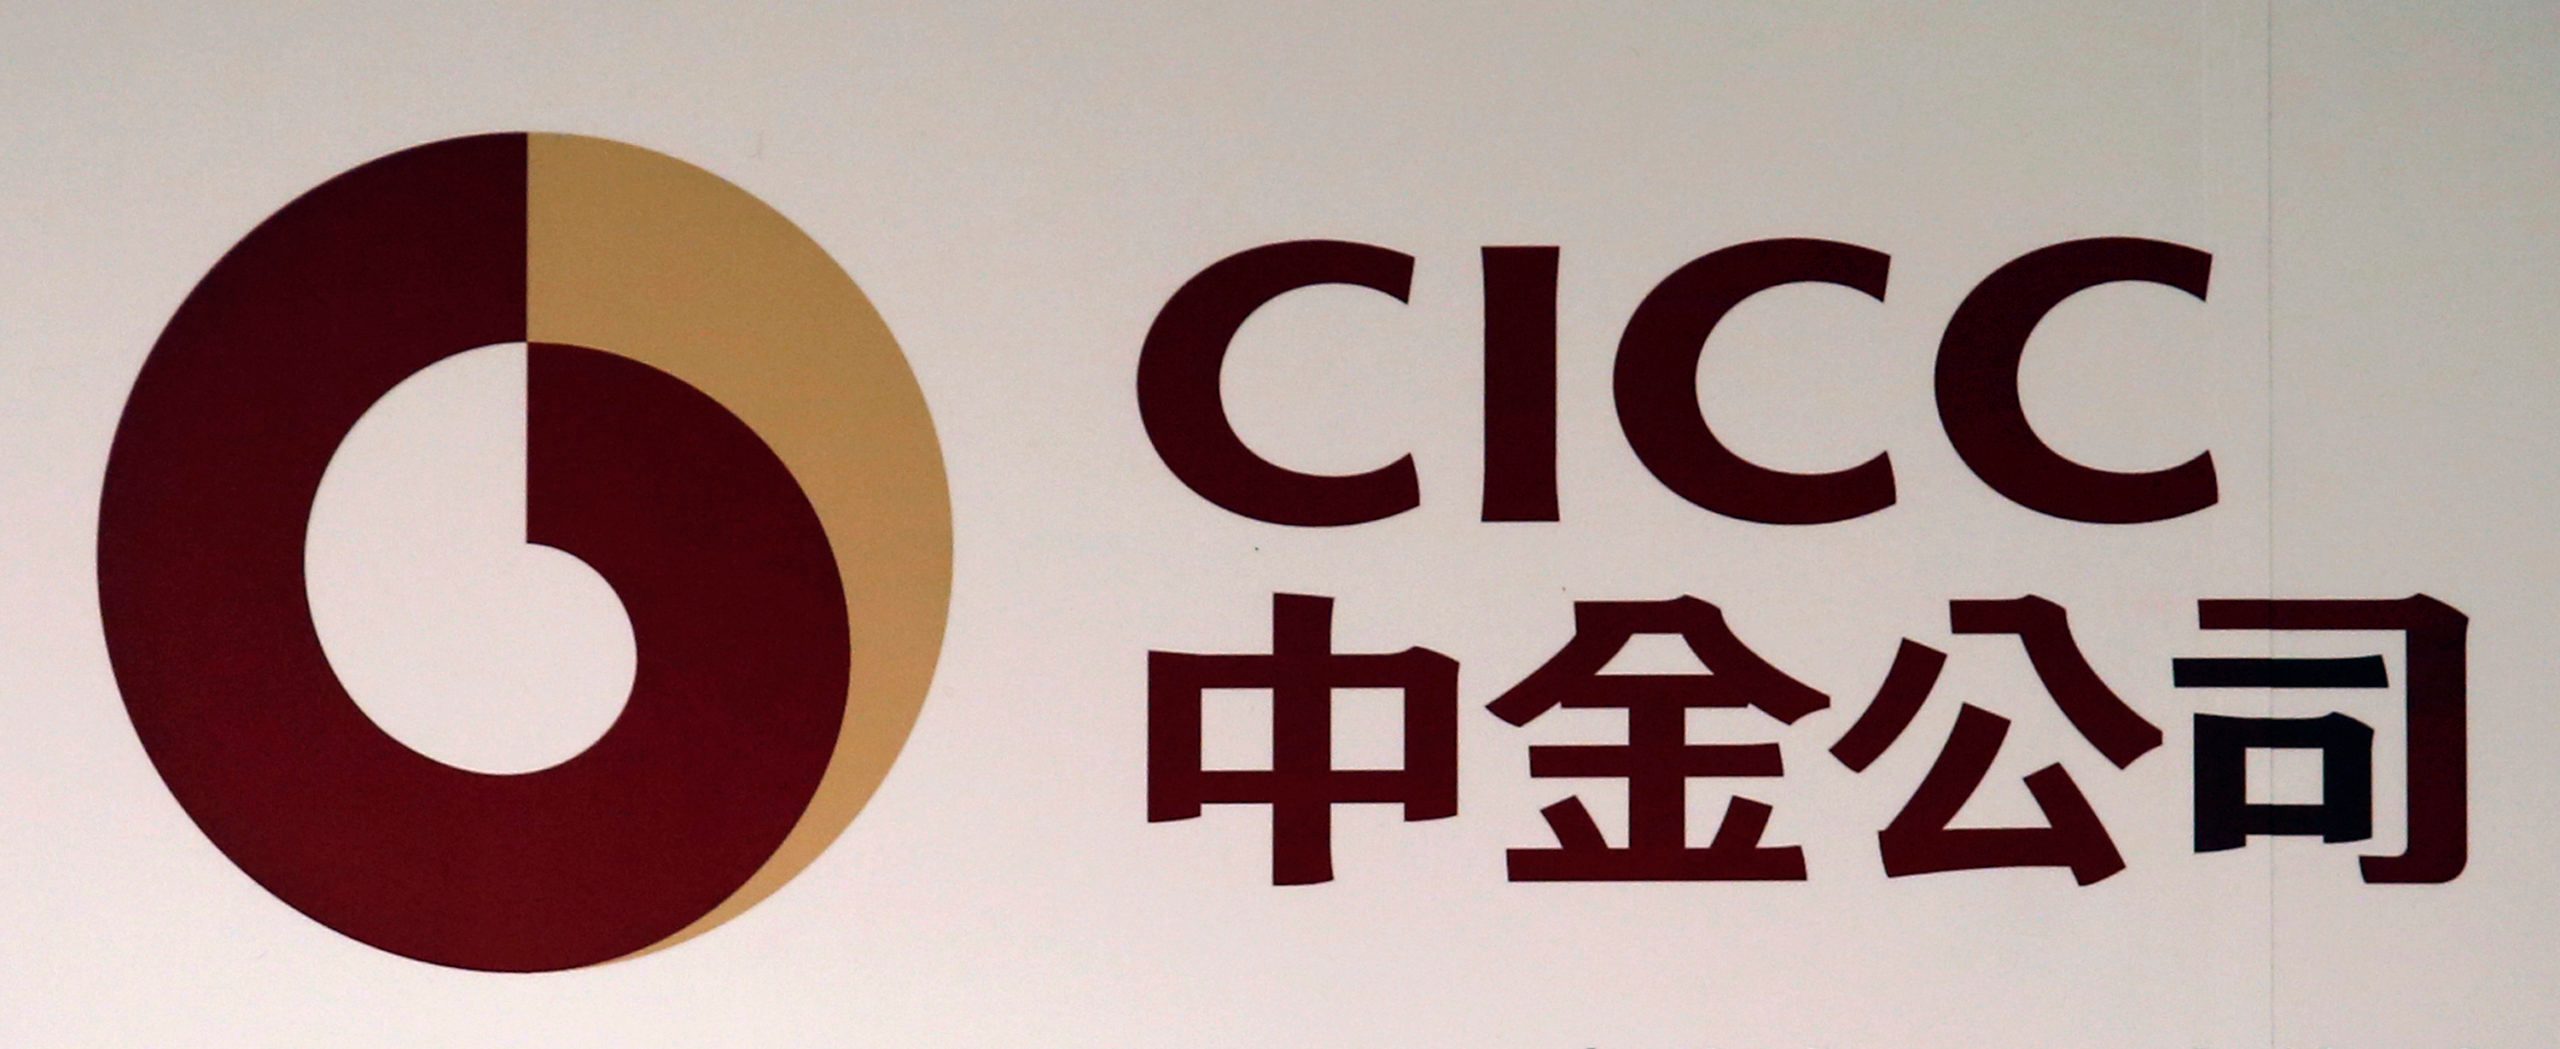 Top CICC exec said to exit for China sovereign fund due to brother's regulator role